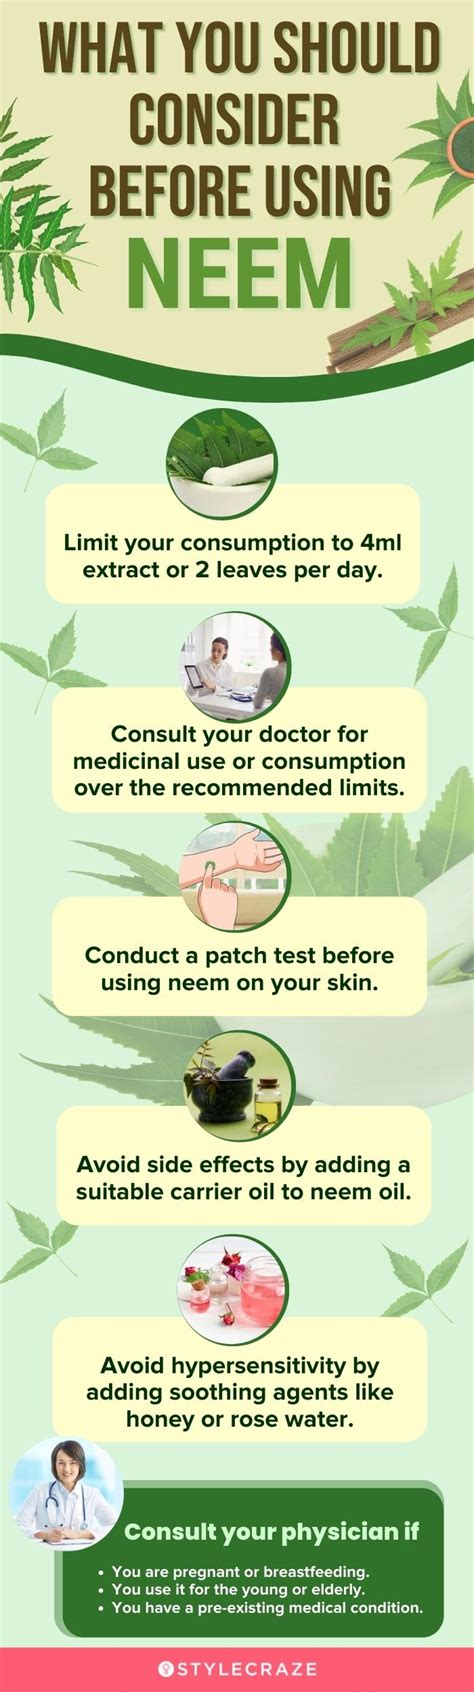 Who should not use neem?